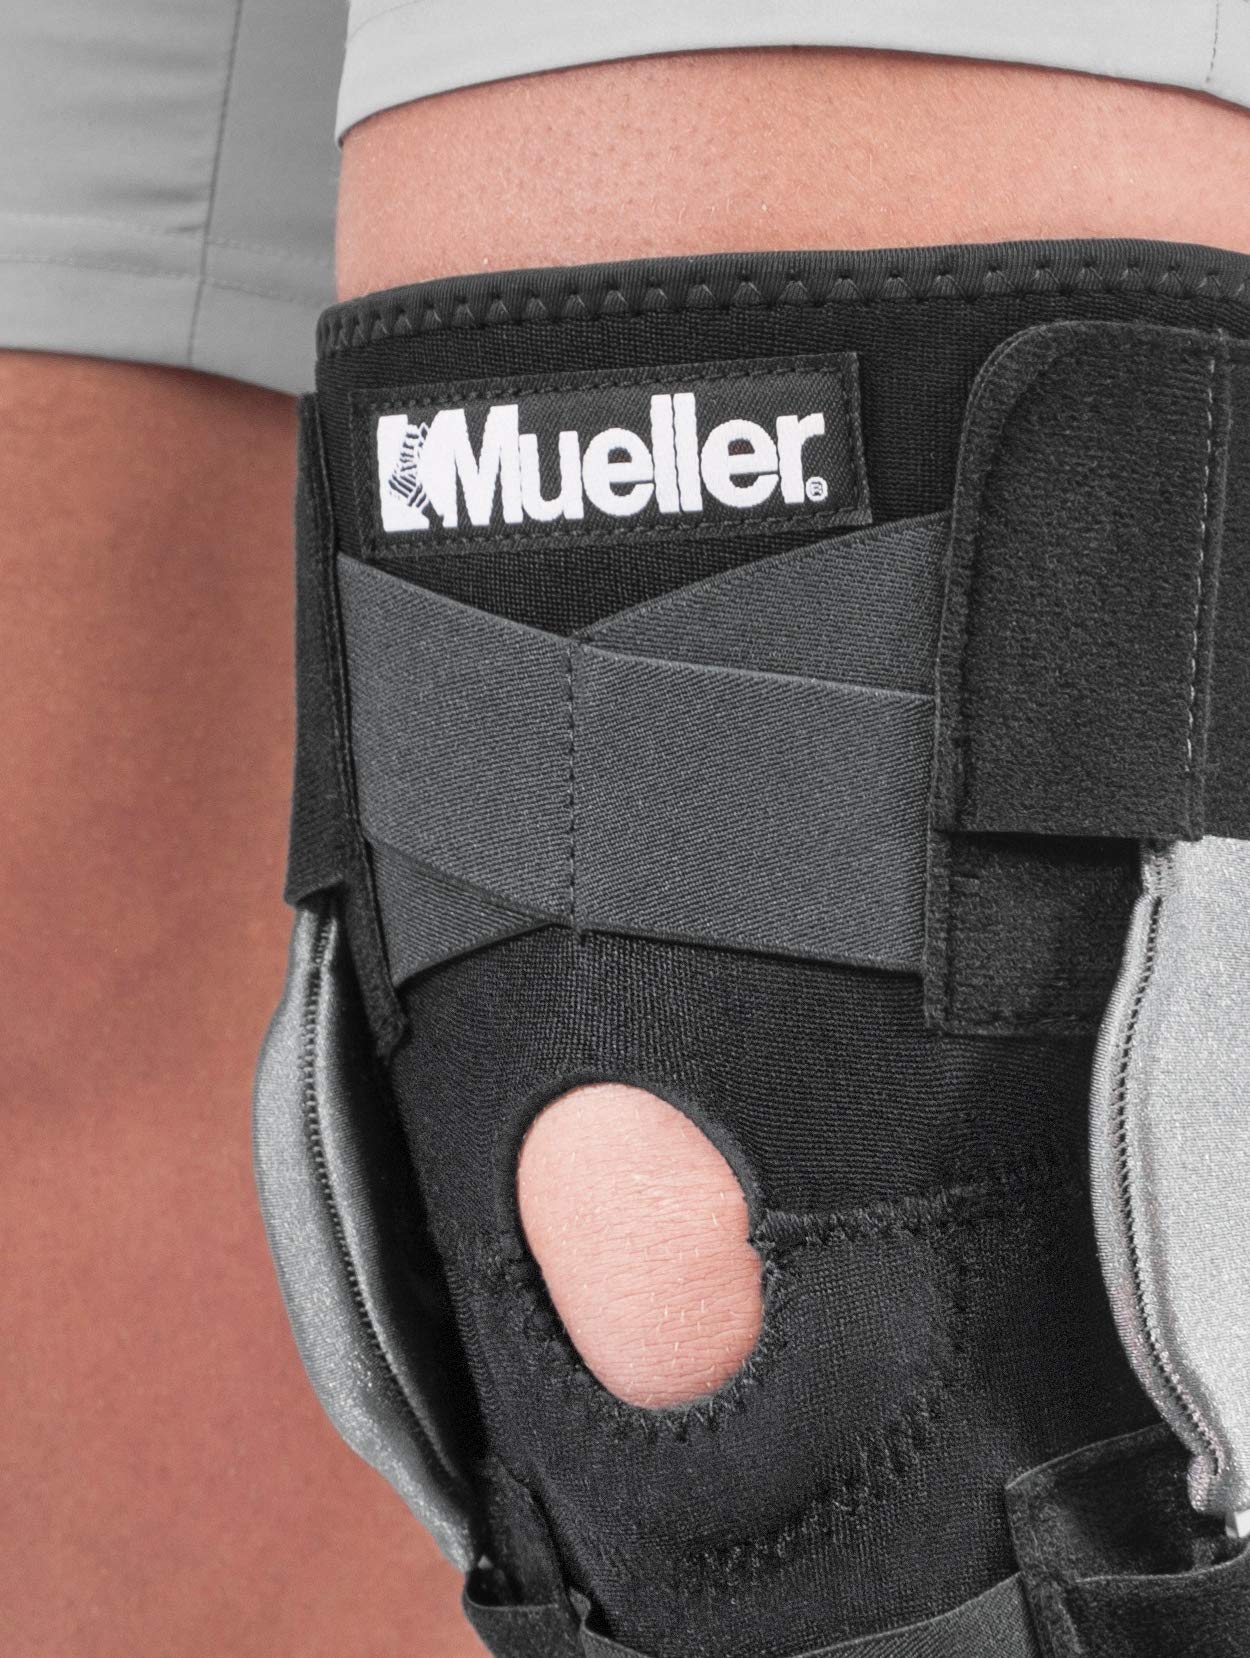 Mueller Sports Medicine Hinged Wrap Around Knee Brace for Adults, Men and Women Knee Support for Pain, Injury, or Arthritis,Black/Gray,13-21 Inches, One Size Fits Most